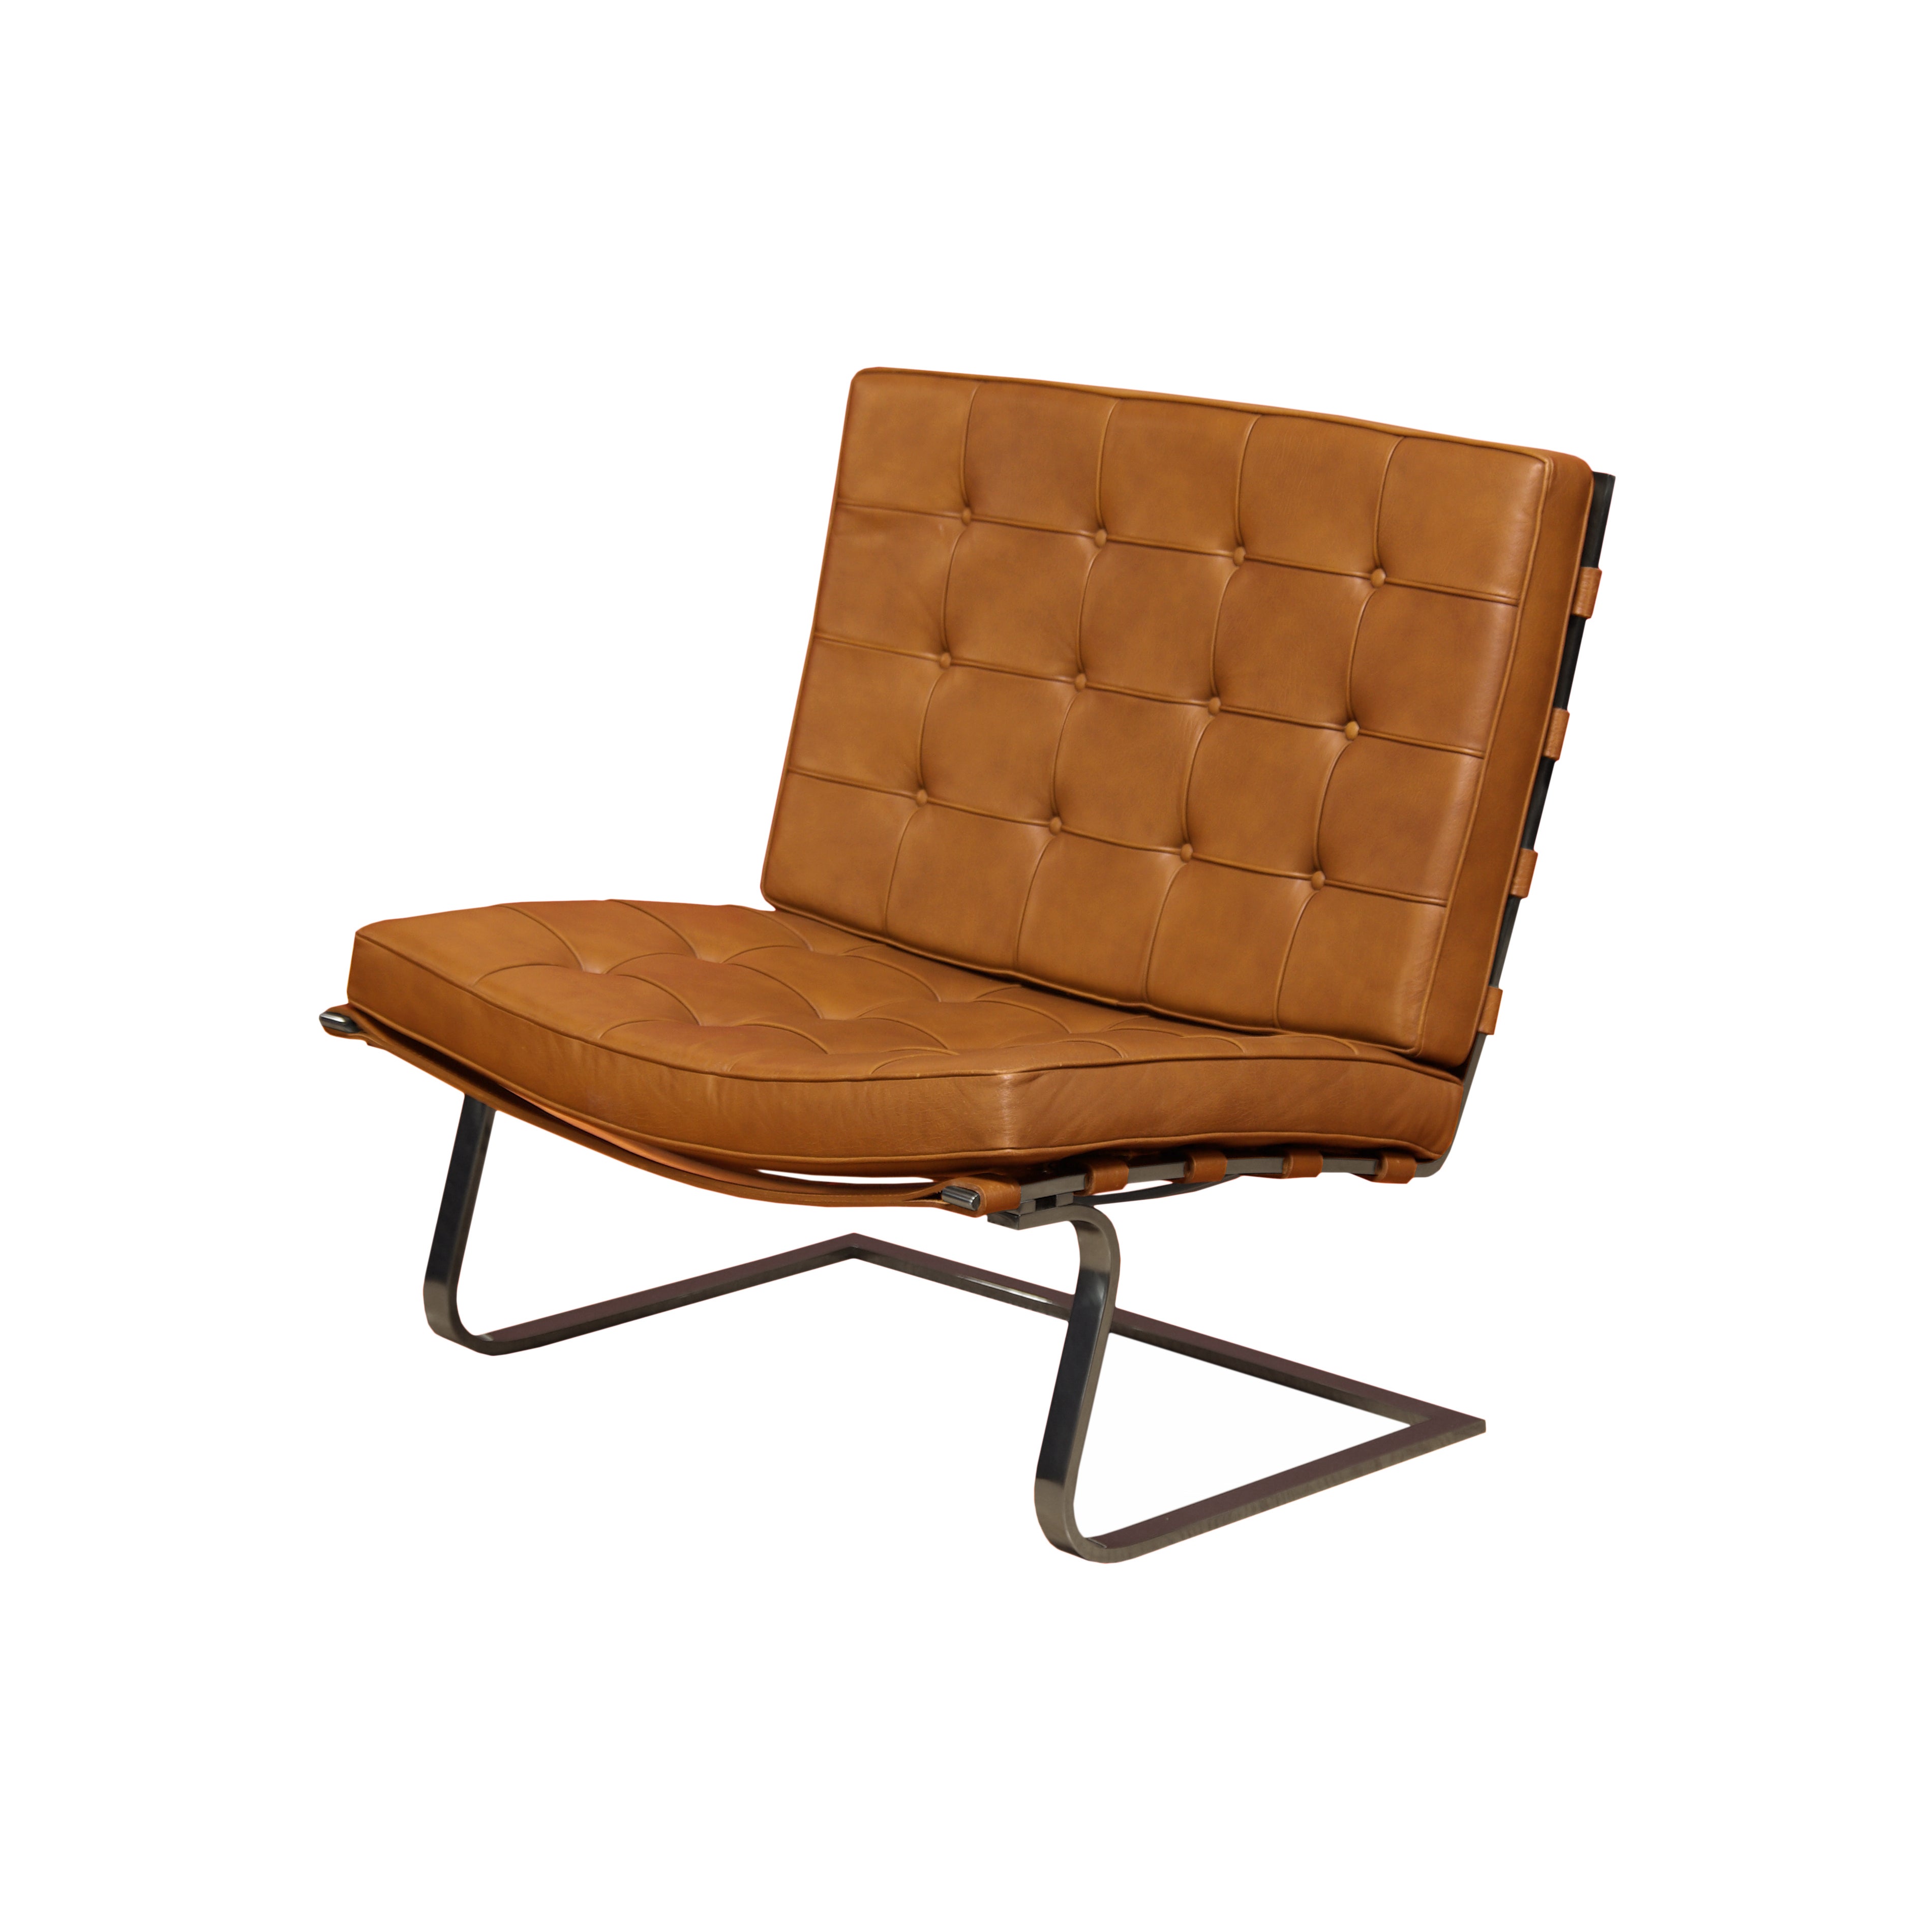 Tugendhat Chair by Ludwig Mies van der Rohe